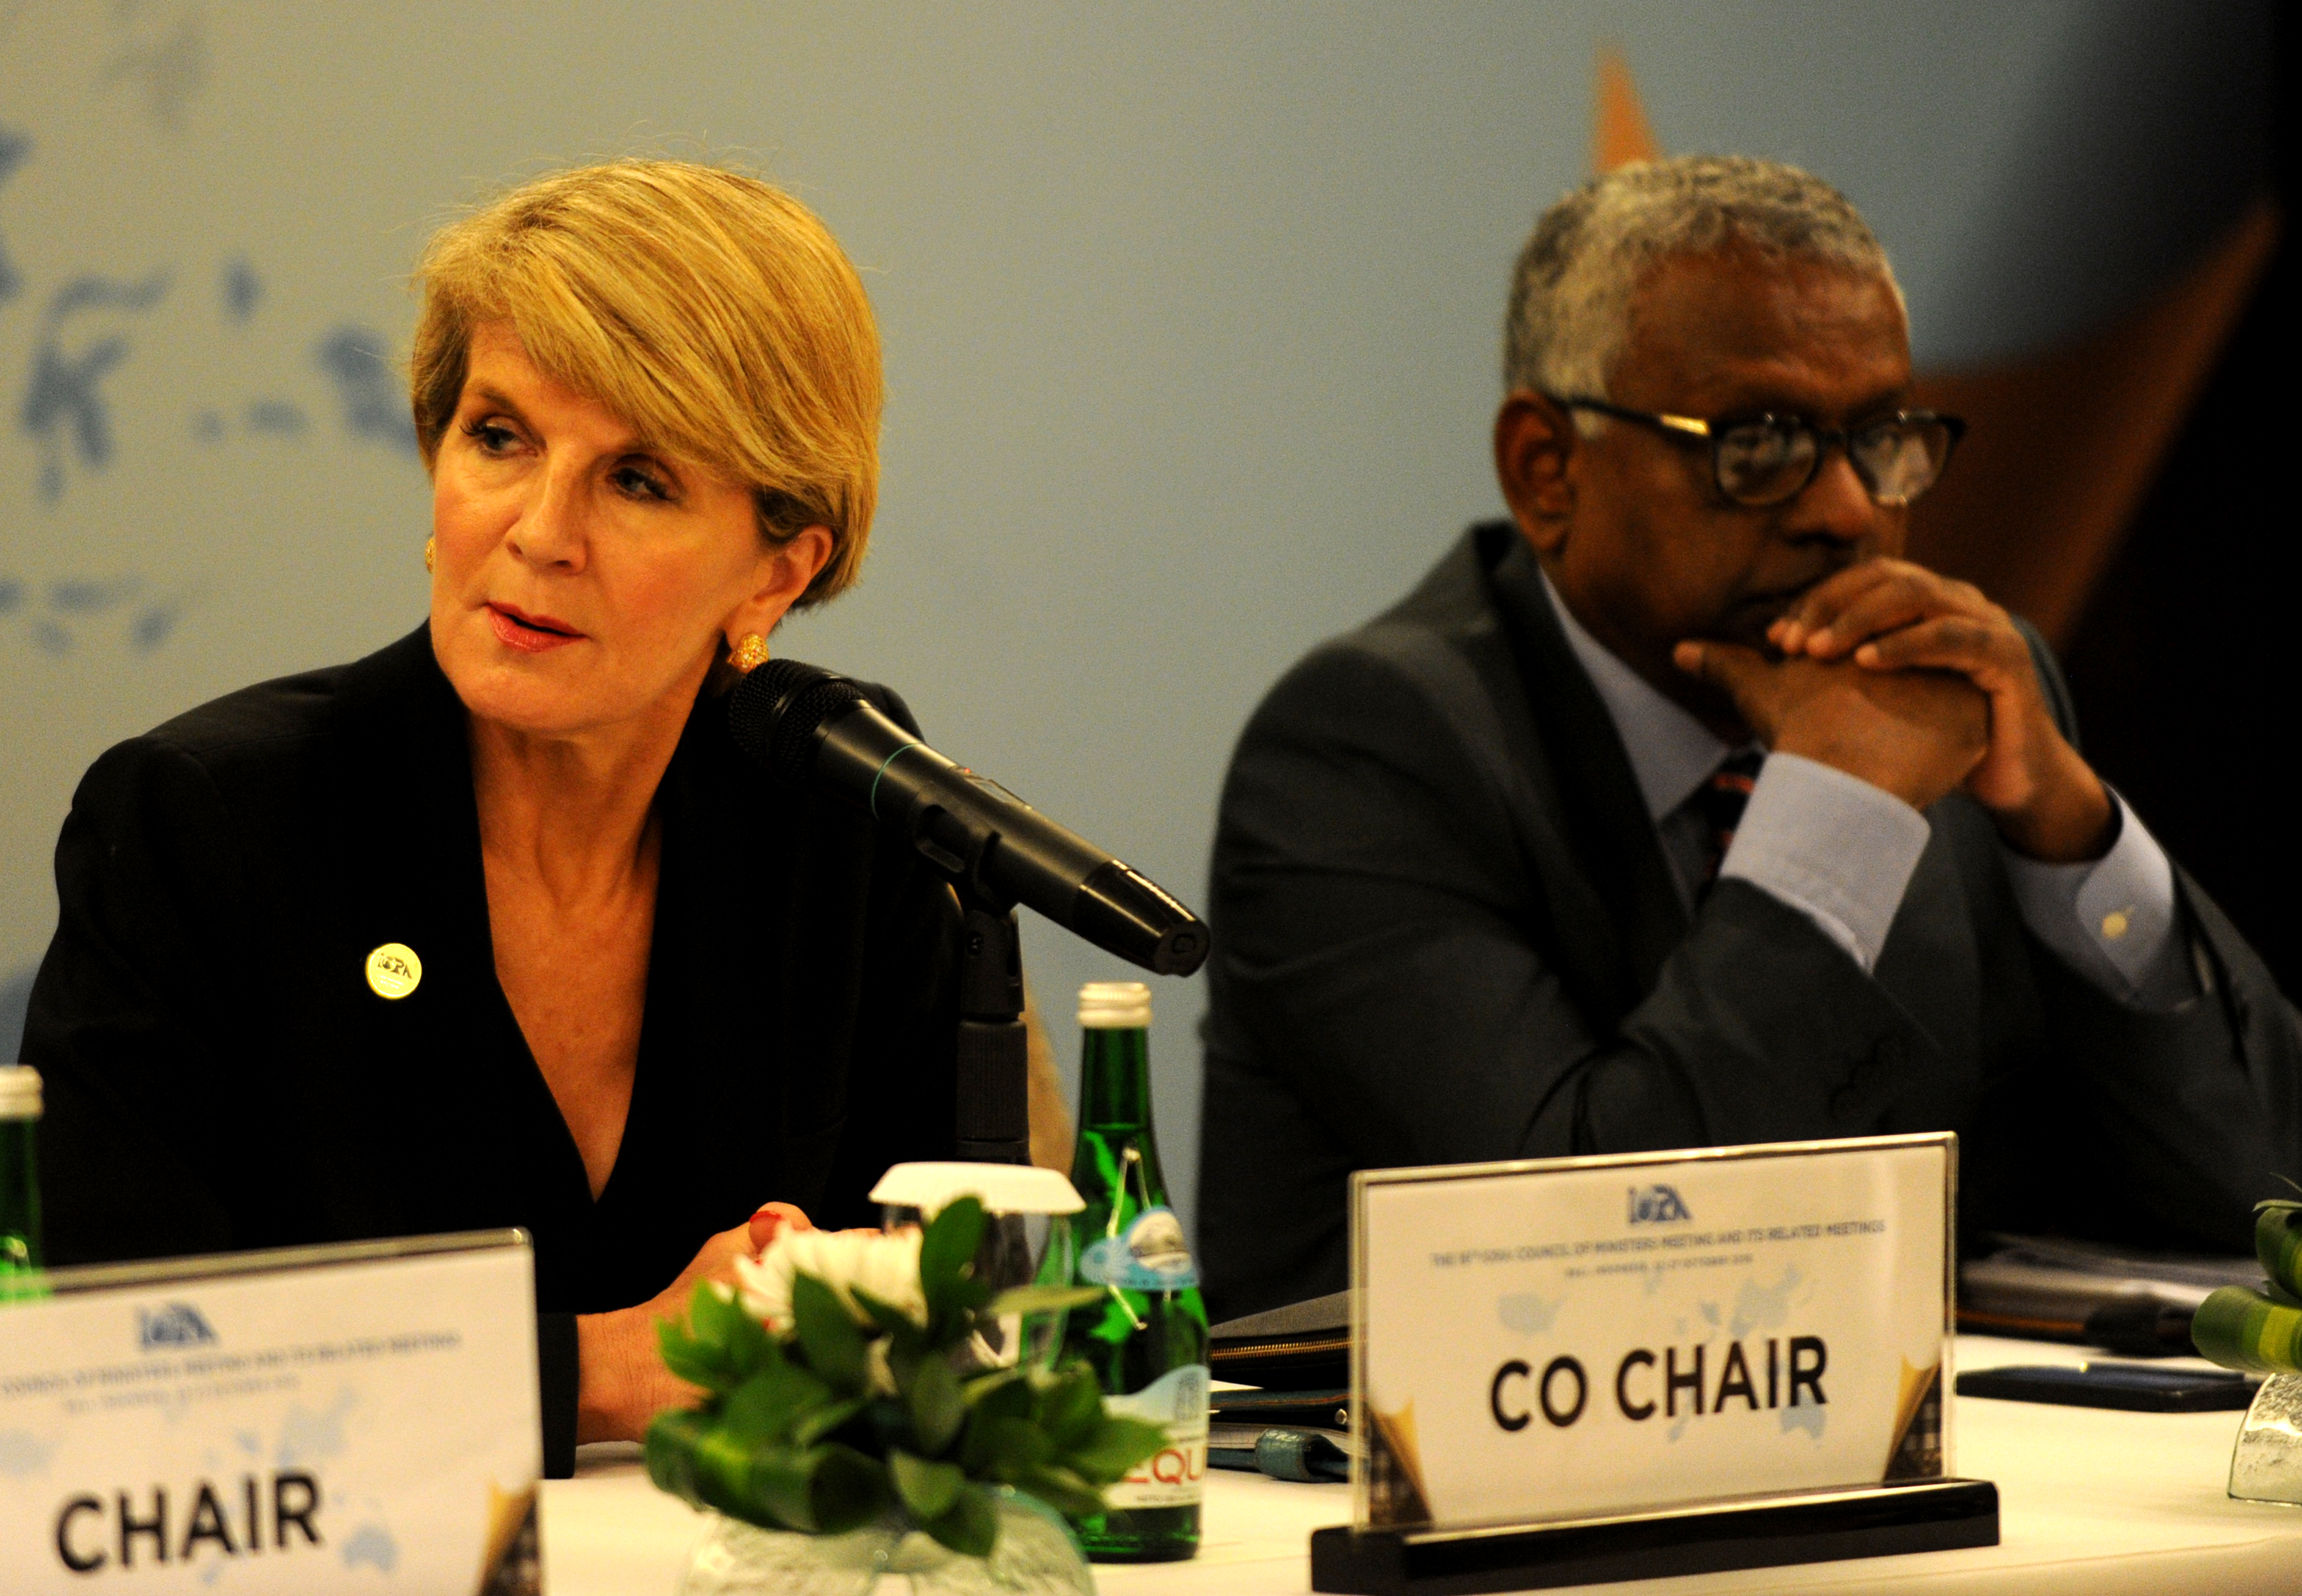 Secretary General of Indian Ocean Rim Association (IORA) K V Bhagirath (R) sits beside Australia's Foreign Minister Julie Bishop (L) as she speaks to journalists during a press confrence of the IORA (Indian Ocean Rim Association) Council of Ministers meeting in Nusa Dua on Indonesia's resort island of Bali on October 27, 2016.  The 16th IORA Meeting and Its Related Meetings are being held from October 22 to 27. / AFP PHOTO / SONNY TUMBELAKA